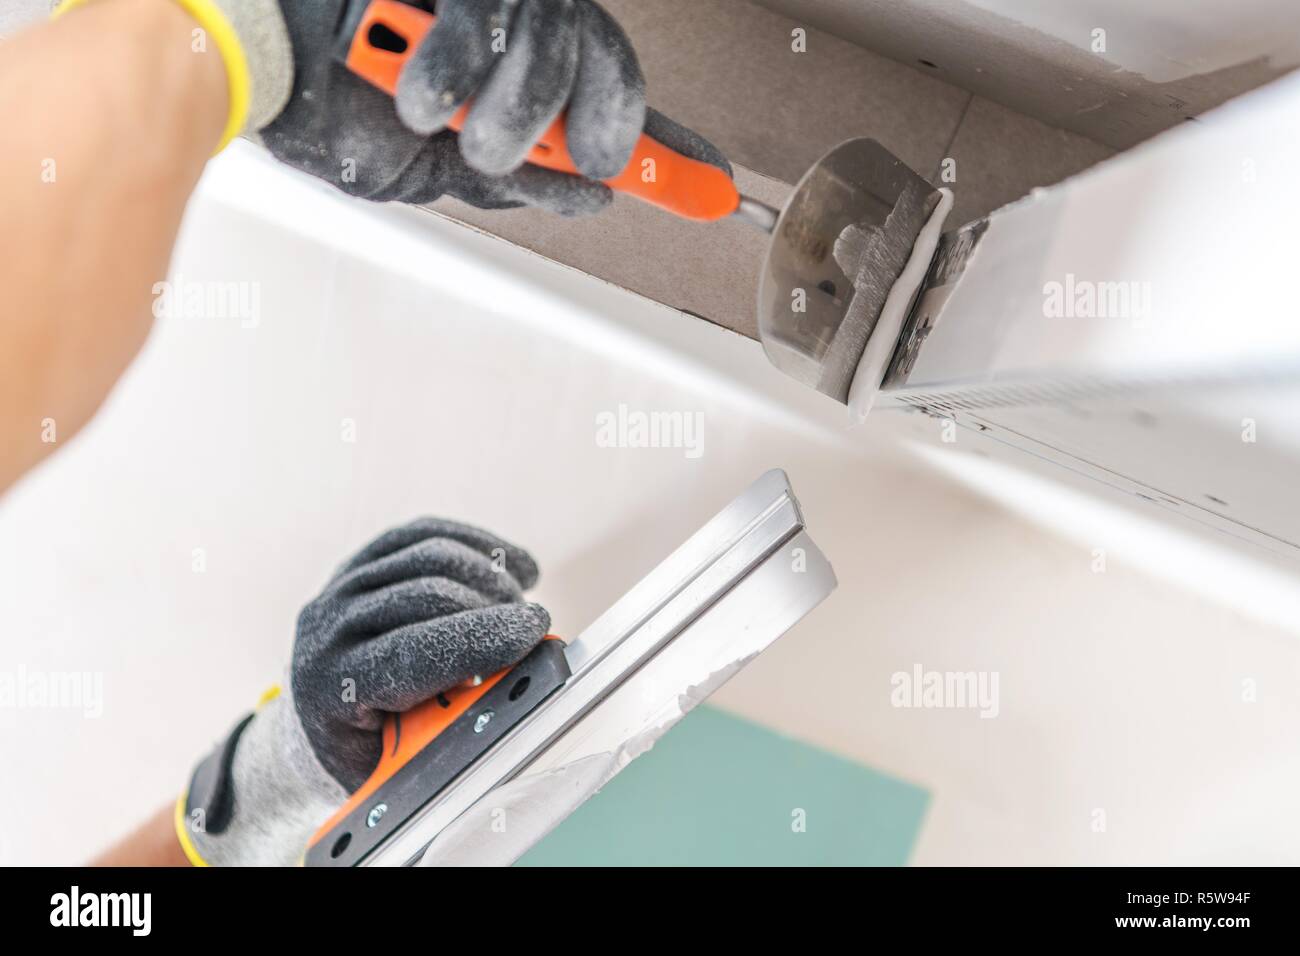 Drywall Ceiling Elements For LED Lighting Building. Worker Patching Drywall. Construction Theme. Stock Photo